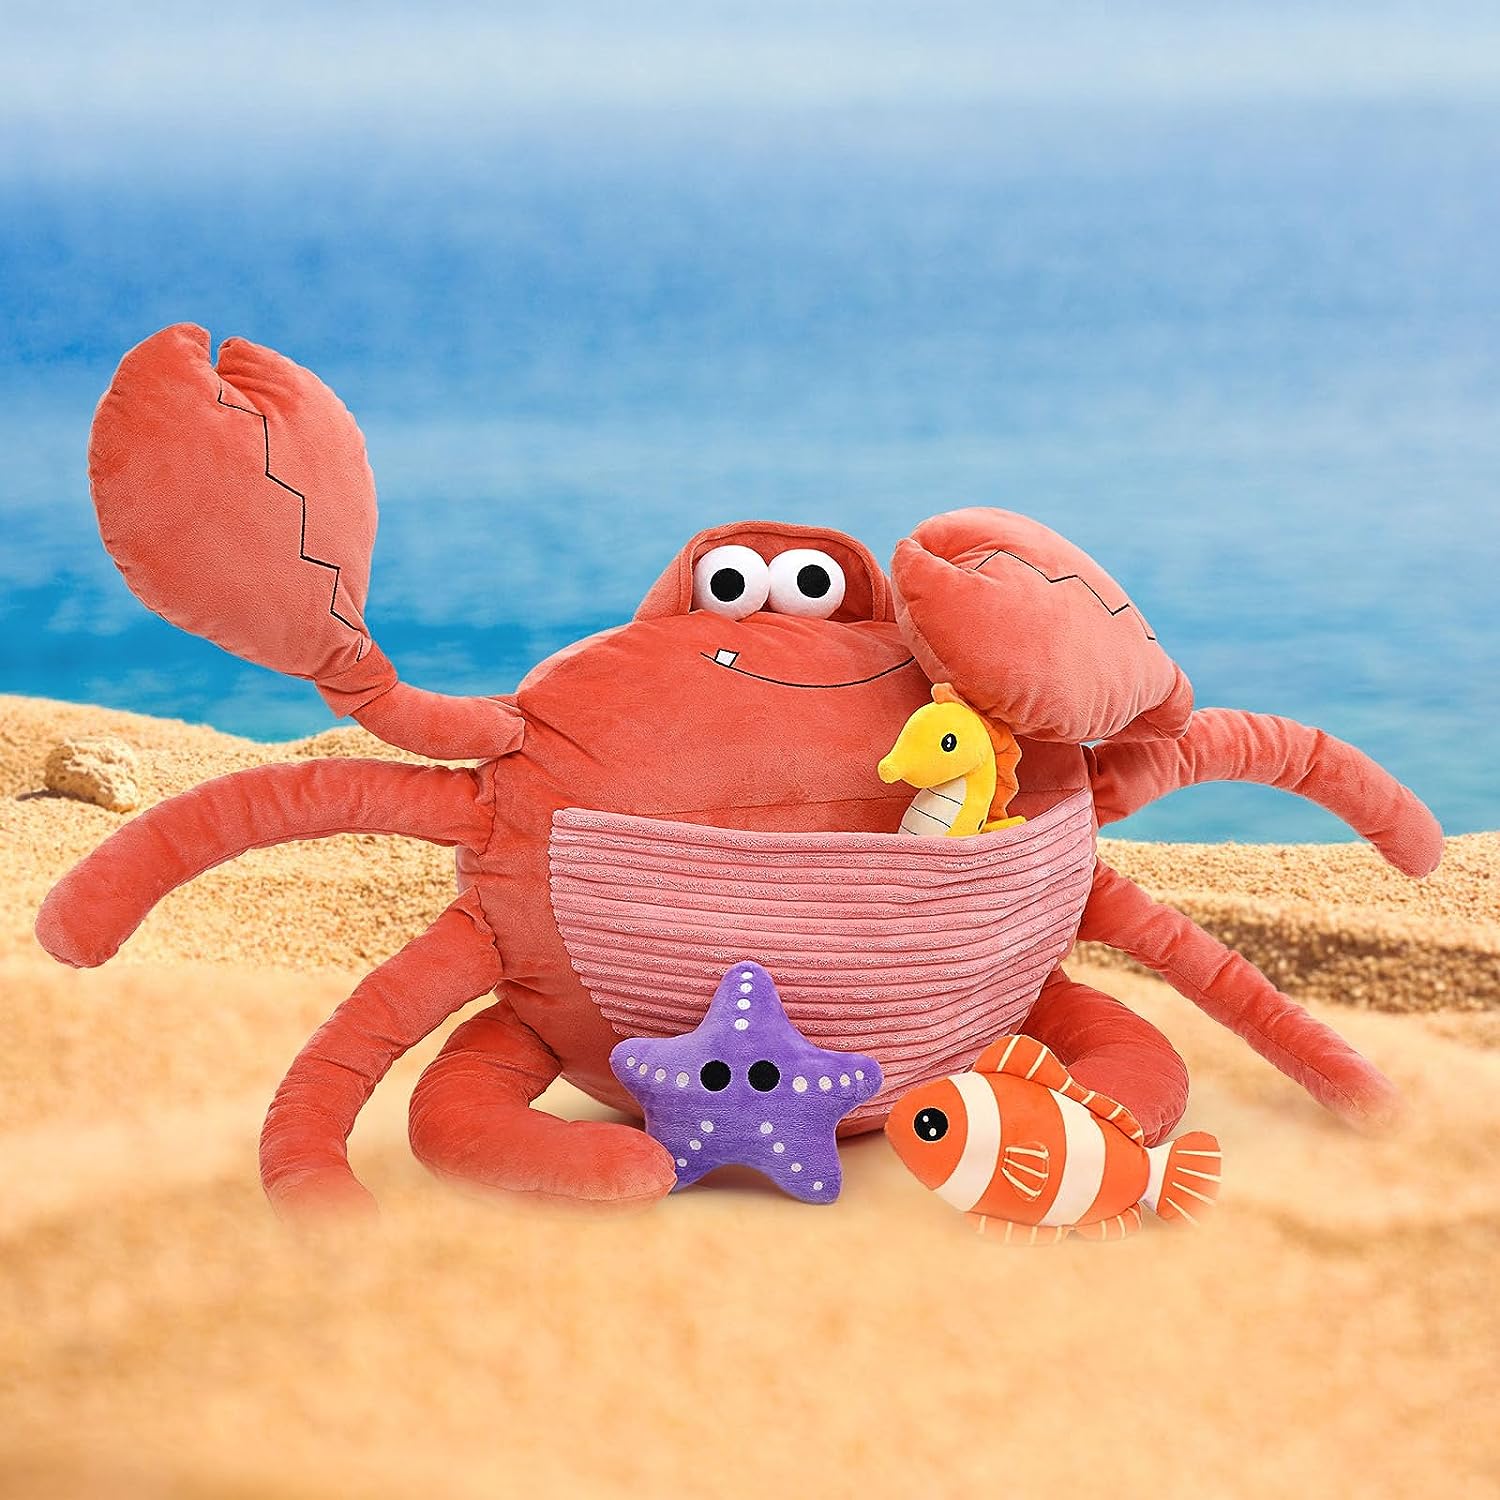 4 Pcs Soft Plush Ocean Animal Toys Set, 40 Inches Giant Weighted Stuffed Crab